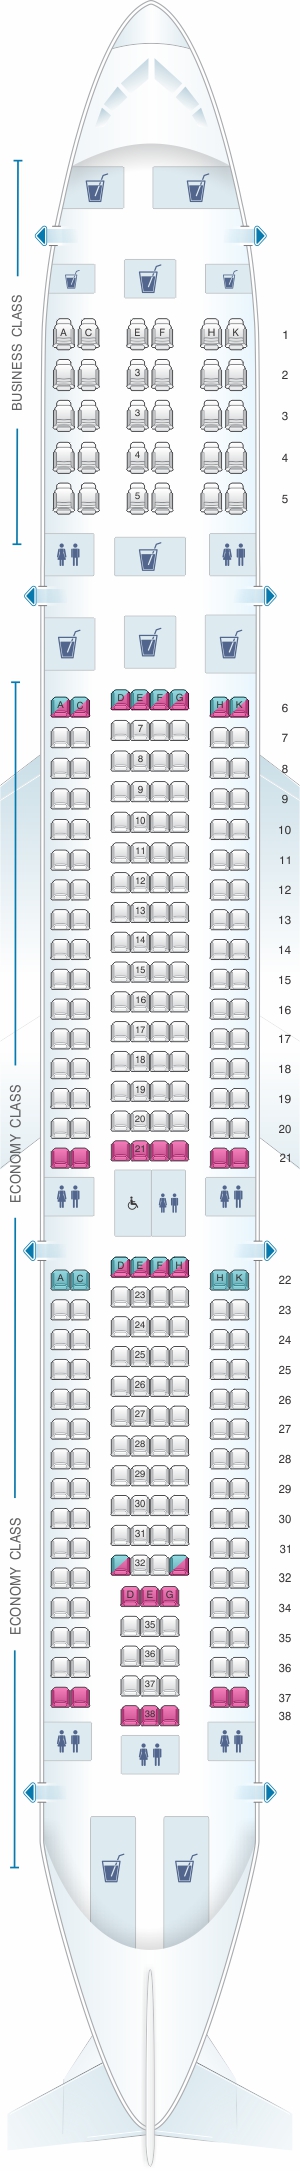 seat assignments on air canada